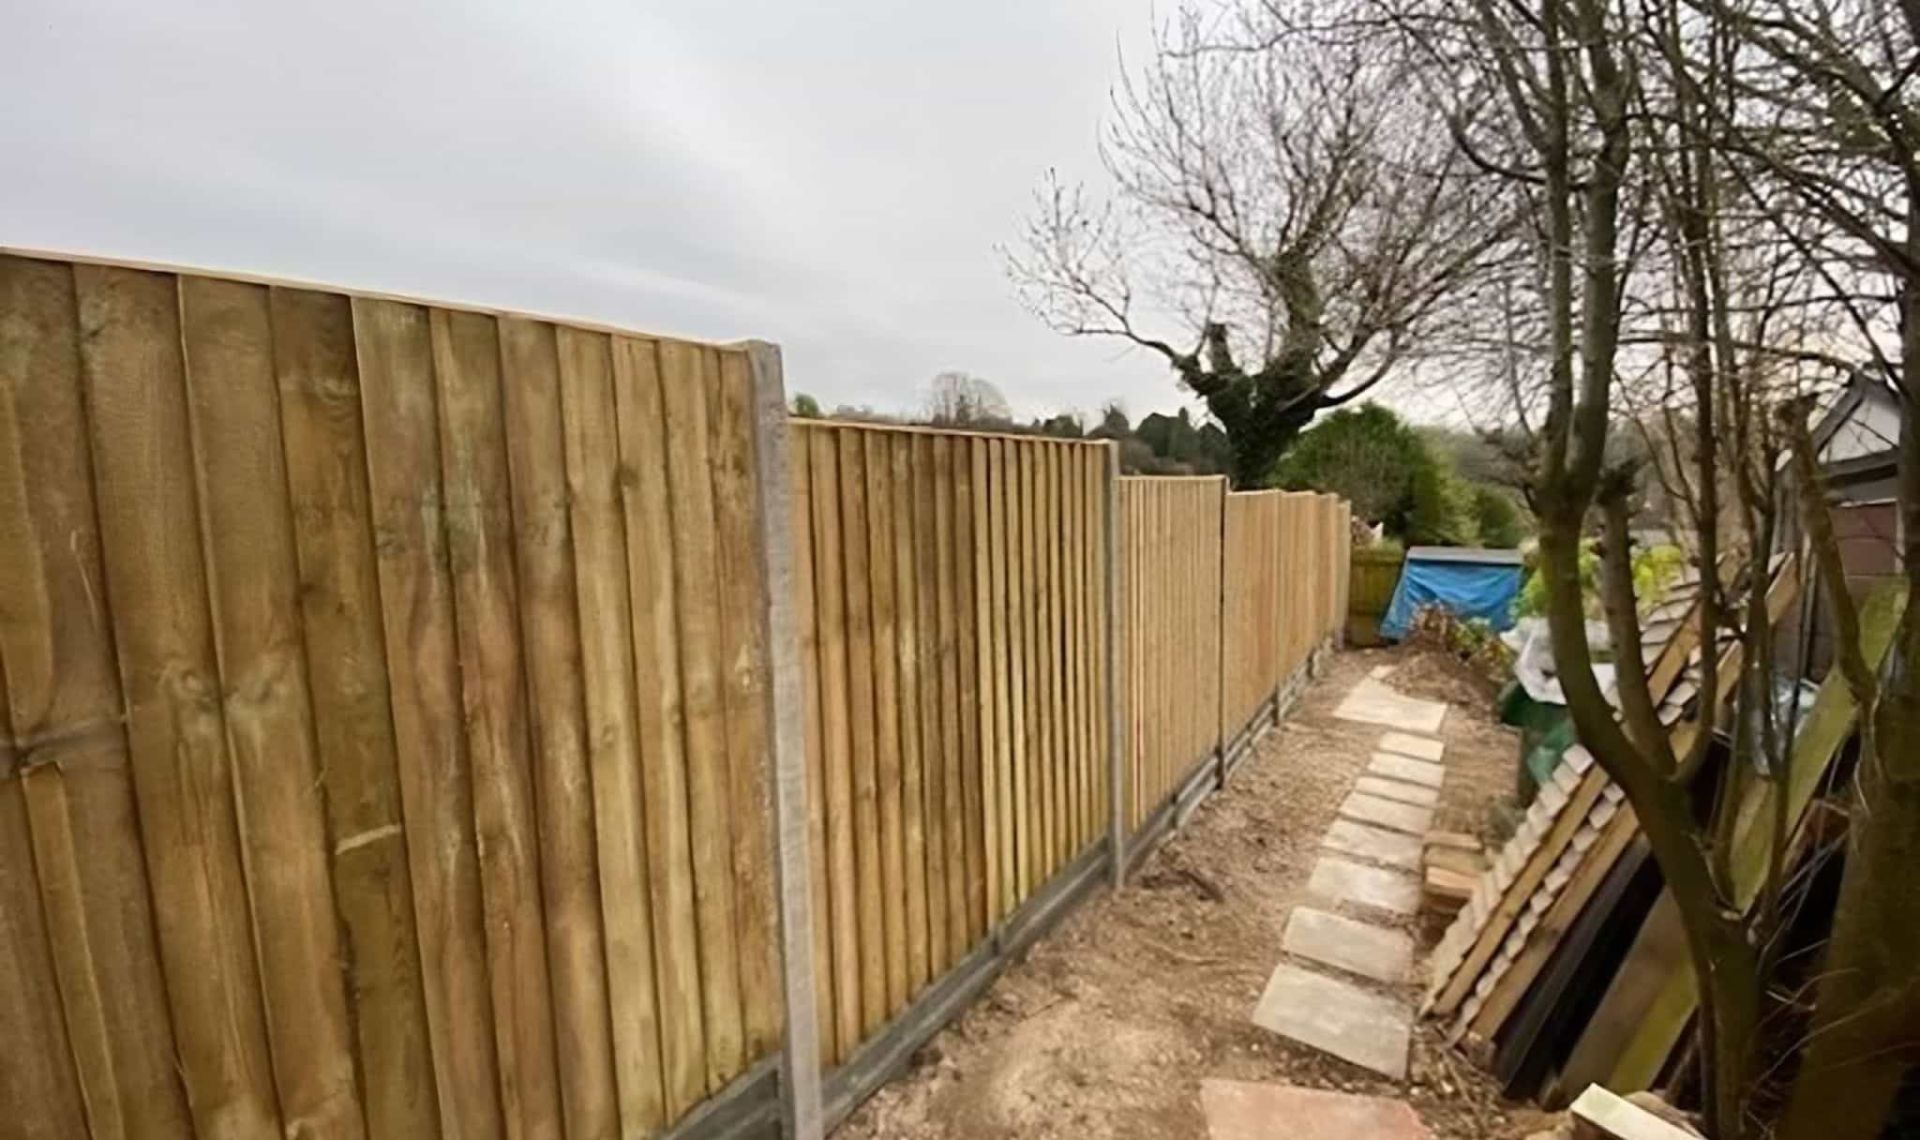 Fencing salisbury at balmoral road just after completion.